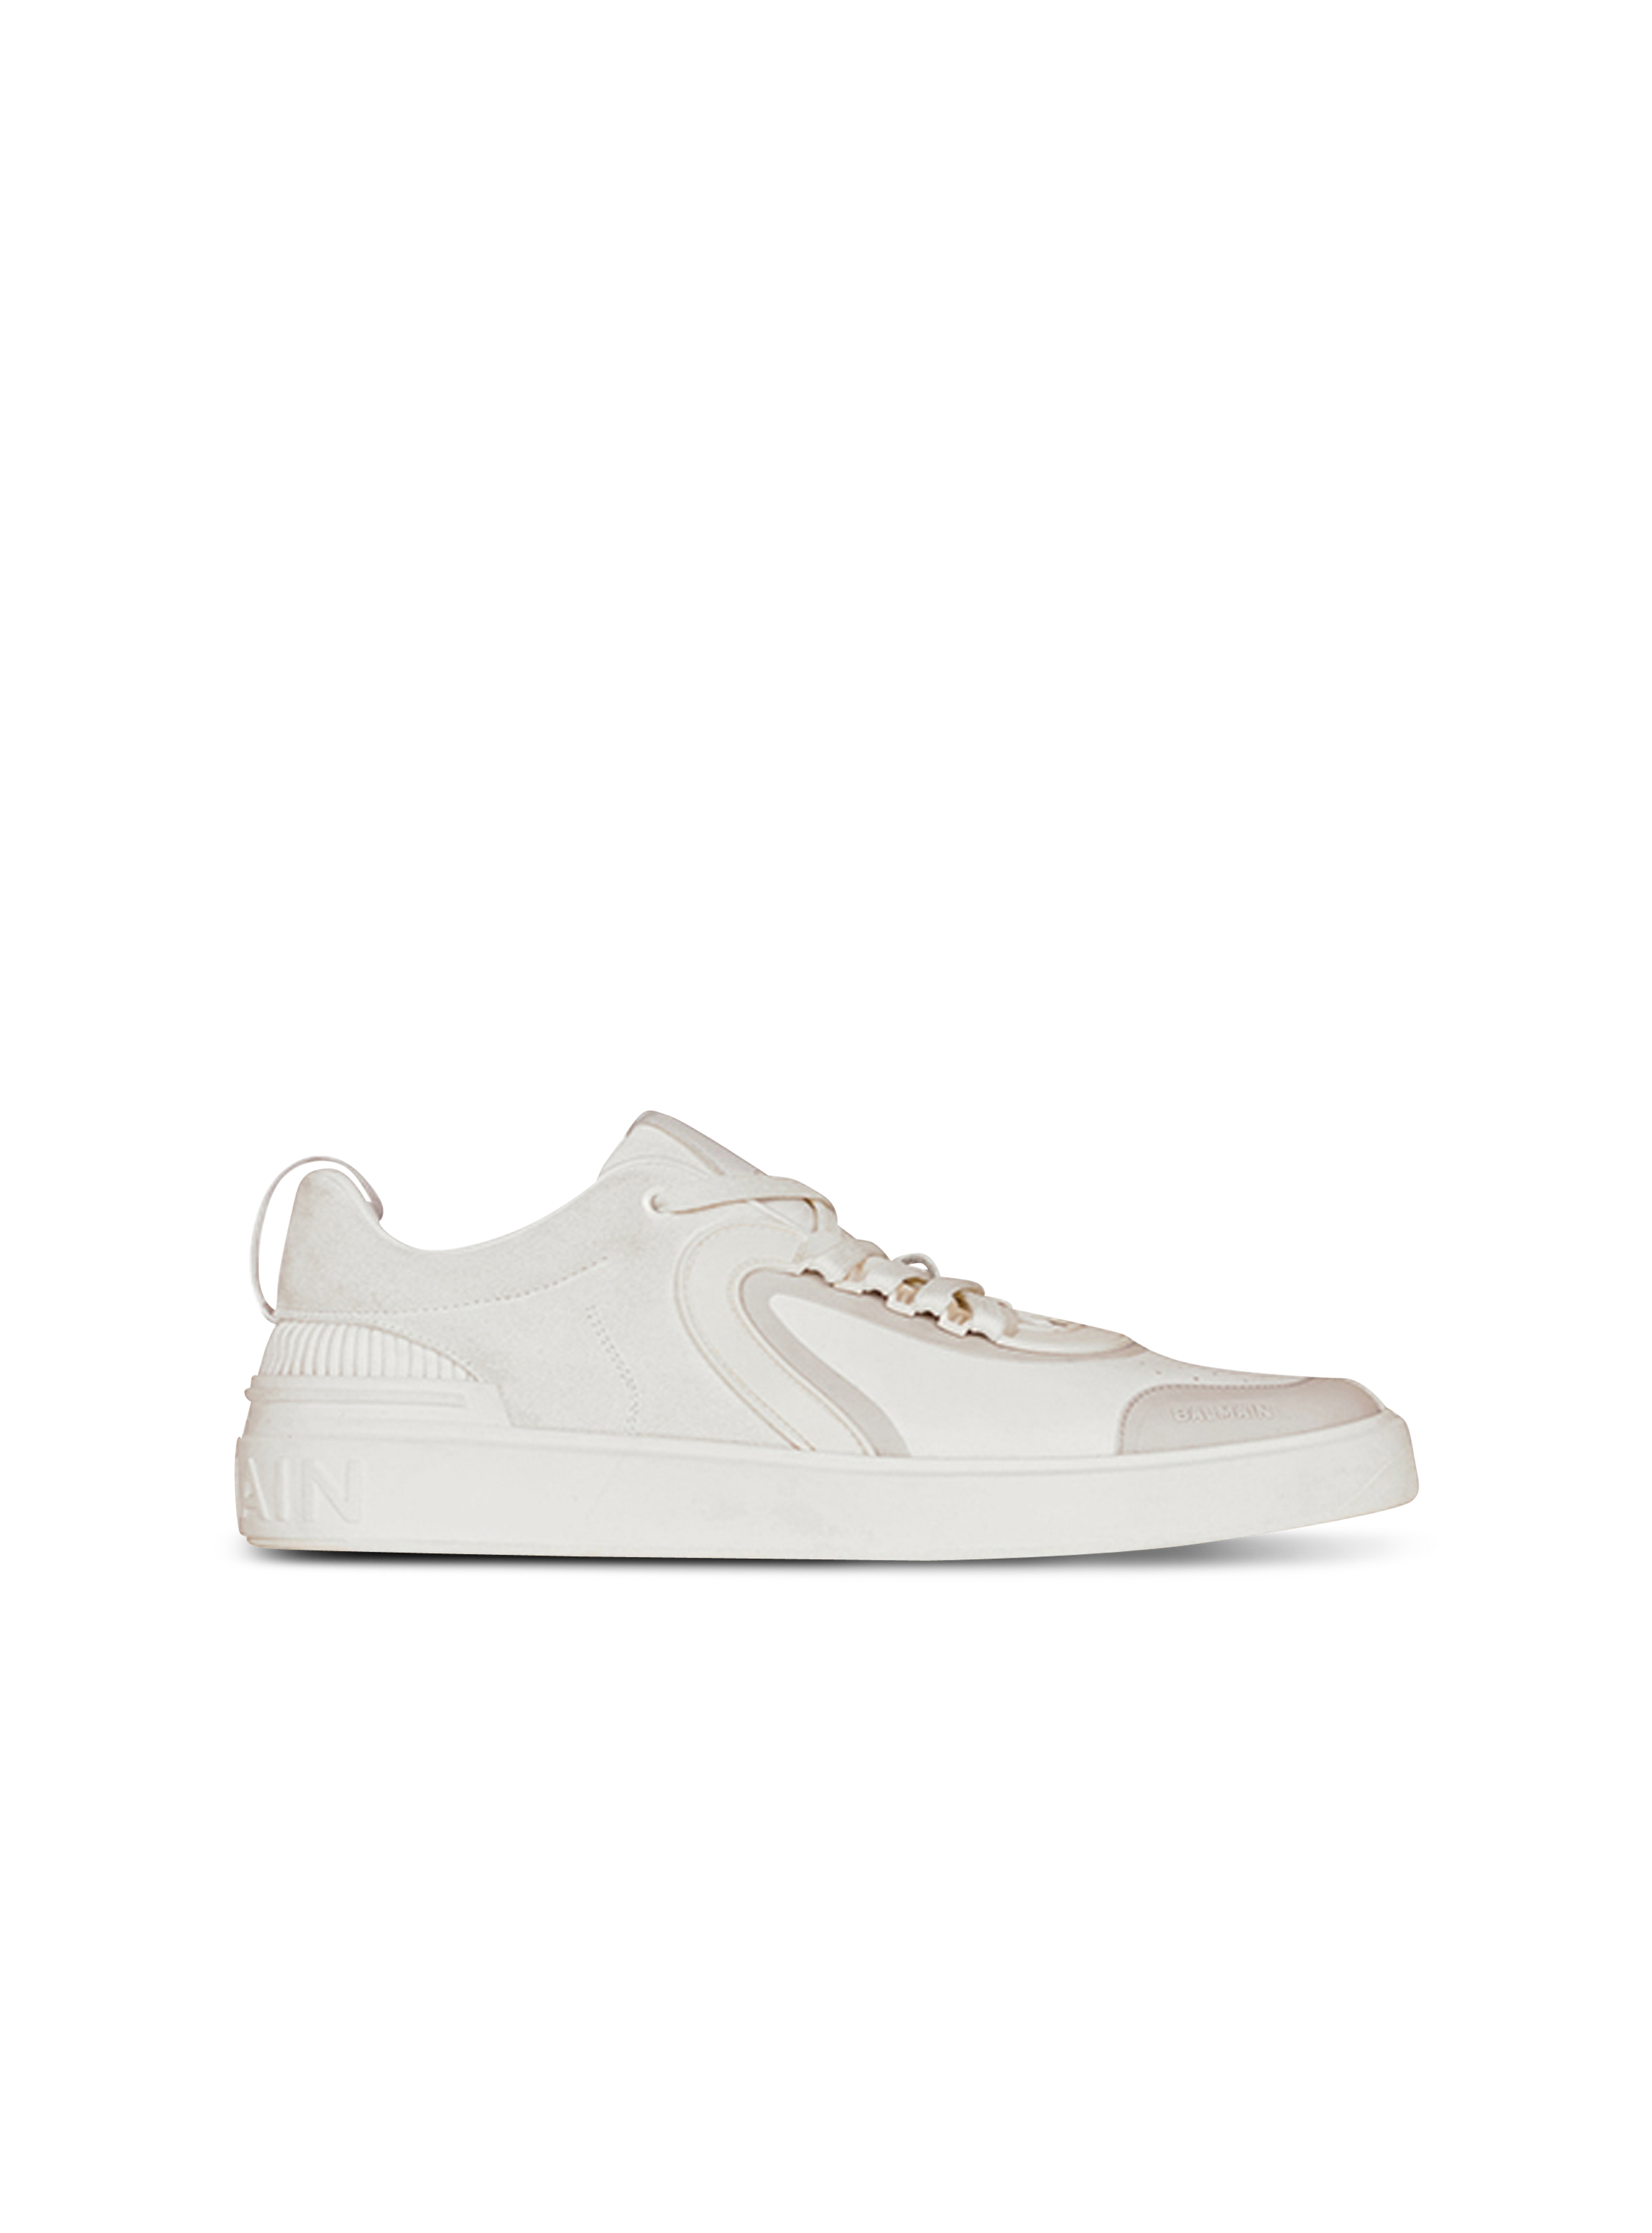 Leather and suede B-Skate sneakers, white